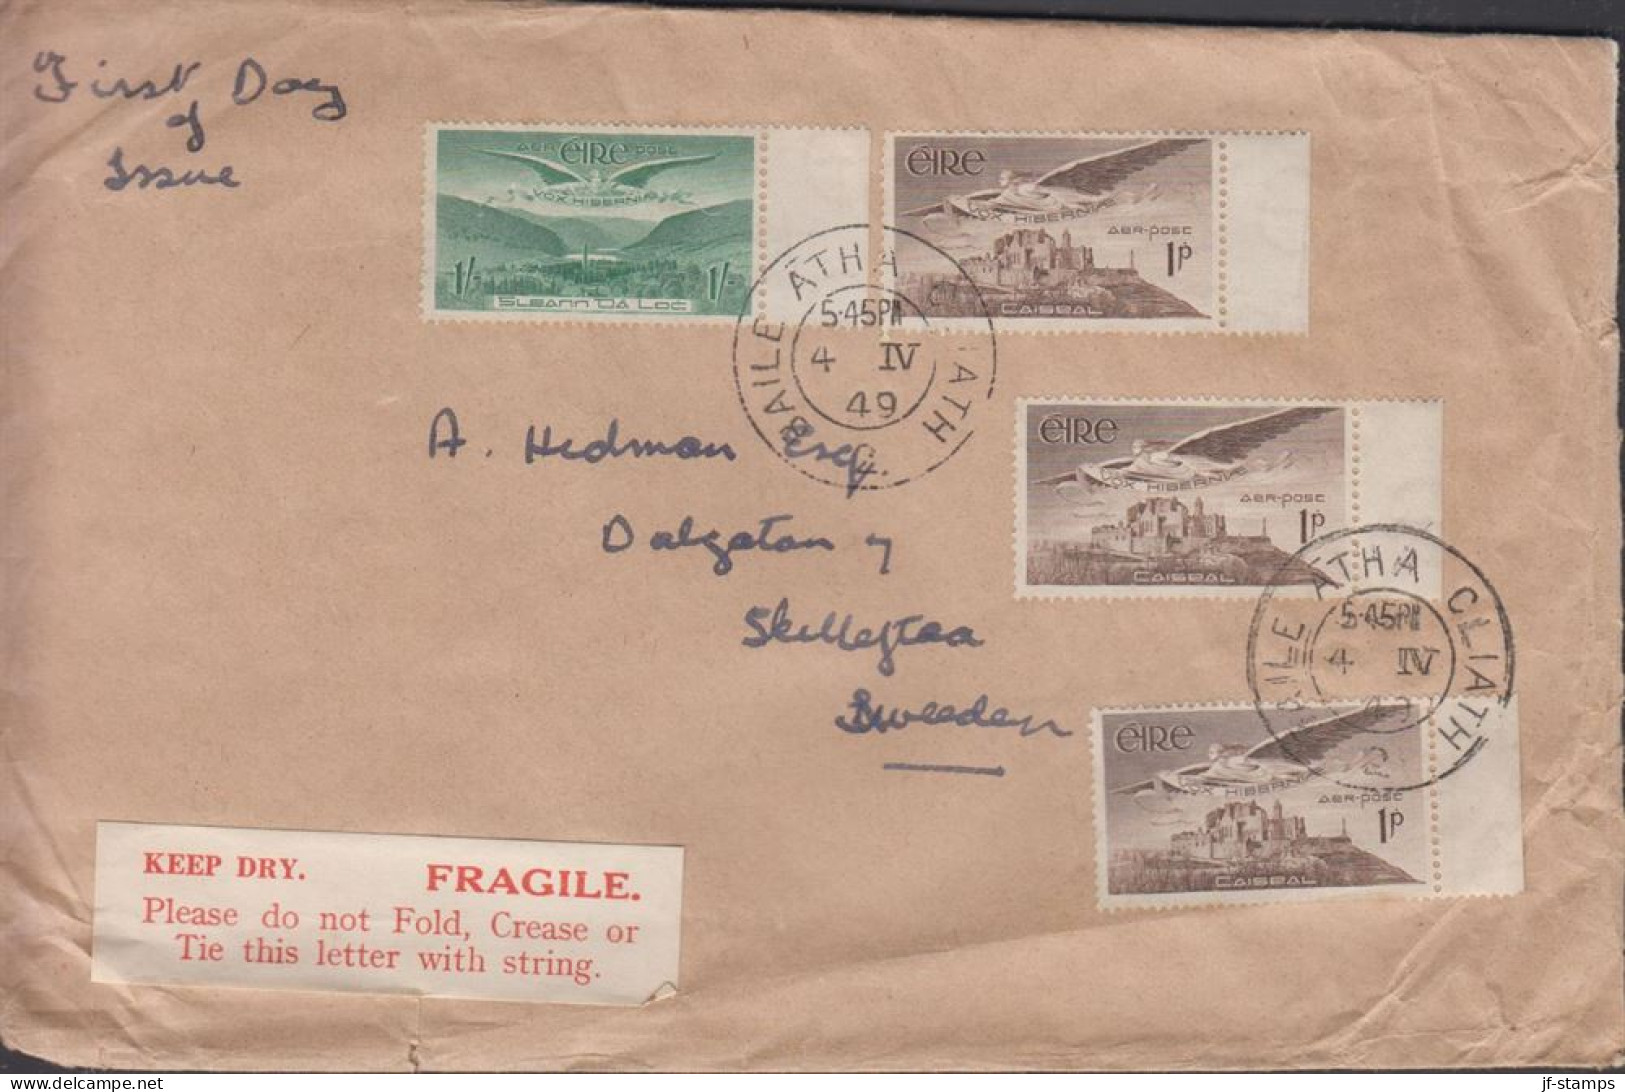 1949. EIRE. 3 Ex 1 P + 1 Sh AIR MAIL On Cover To Sweden Cancelled BAILE ATHA CLIATH 4 IV 49.... (Michel 102+) - JF432467 - Briefe U. Dokumente